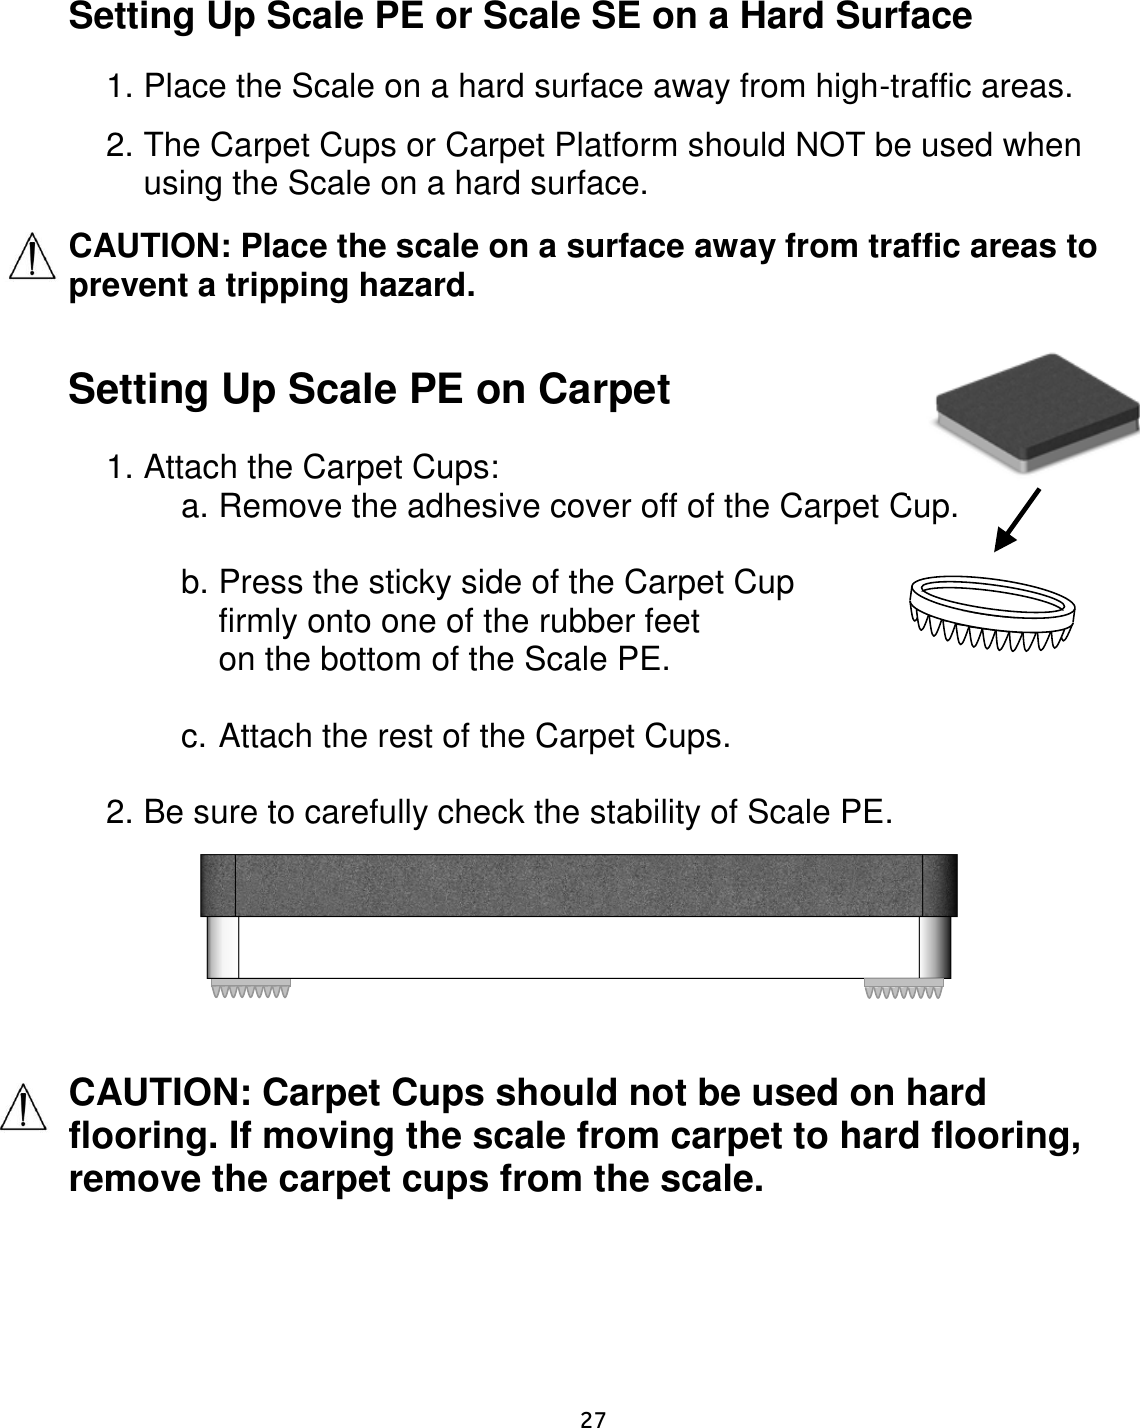     27  Setting Up Scale PE or Scale SE on a Hard Surface  1. Place the Scale on a hard surface away from high-traffic areas.  2. The Carpet Cups or Carpet Platform should NOT be used when using the Scale on a hard surface. CAUTION: Place the scale on a surface away from traffic areas to prevent a tripping hazard.  Setting Up Scale PE on Carpet  1. Attach the Carpet Cups: a. Remove the adhesive cover off of the Carpet Cup.  b. Press the sticky side of the Carpet Cup  firmly onto one of the rubber feet on the bottom of the Scale PE.  c. Attach the rest of the Carpet Cups.  2. Be sure to carefully check the stability of Scale PE.         CAUTION: Carpet Cups should not be used on hard flooring. If moving the scale from carpet to hard flooring, remove the carpet cups from the scale.    